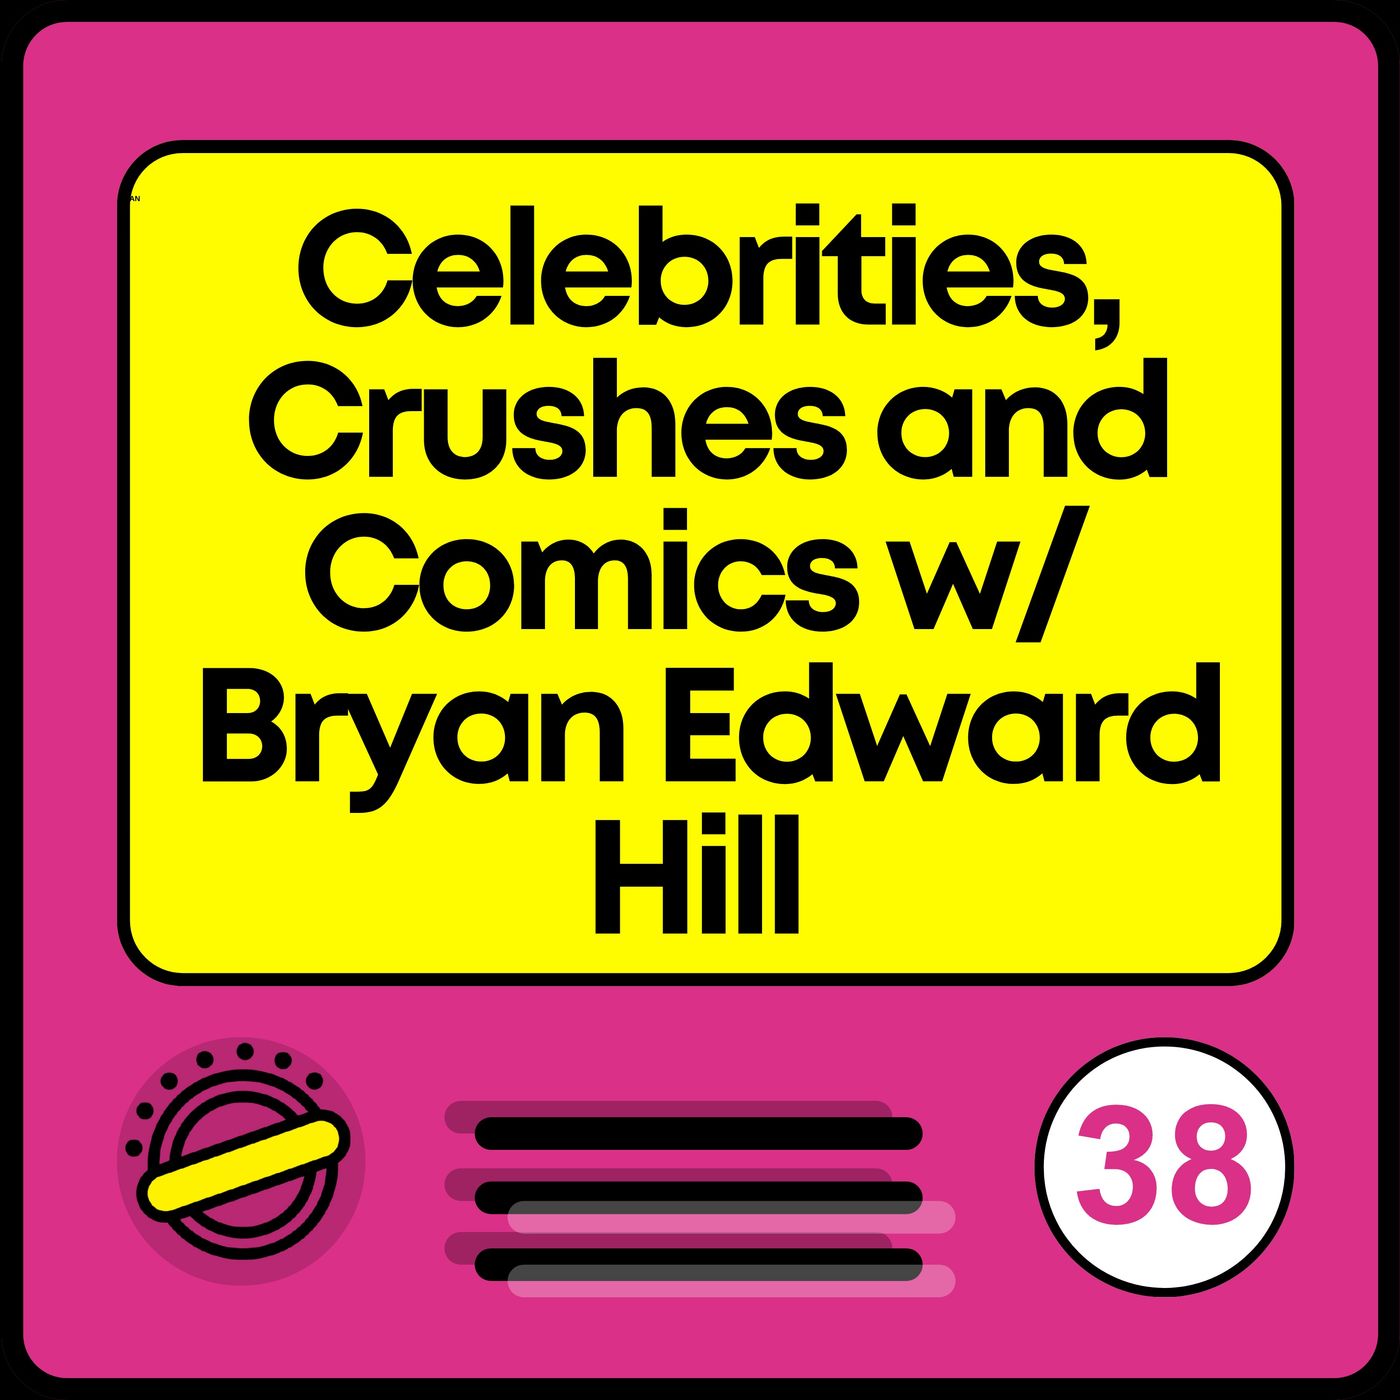 Celebrities, Crushes and Comics with Bryan Edward Hill